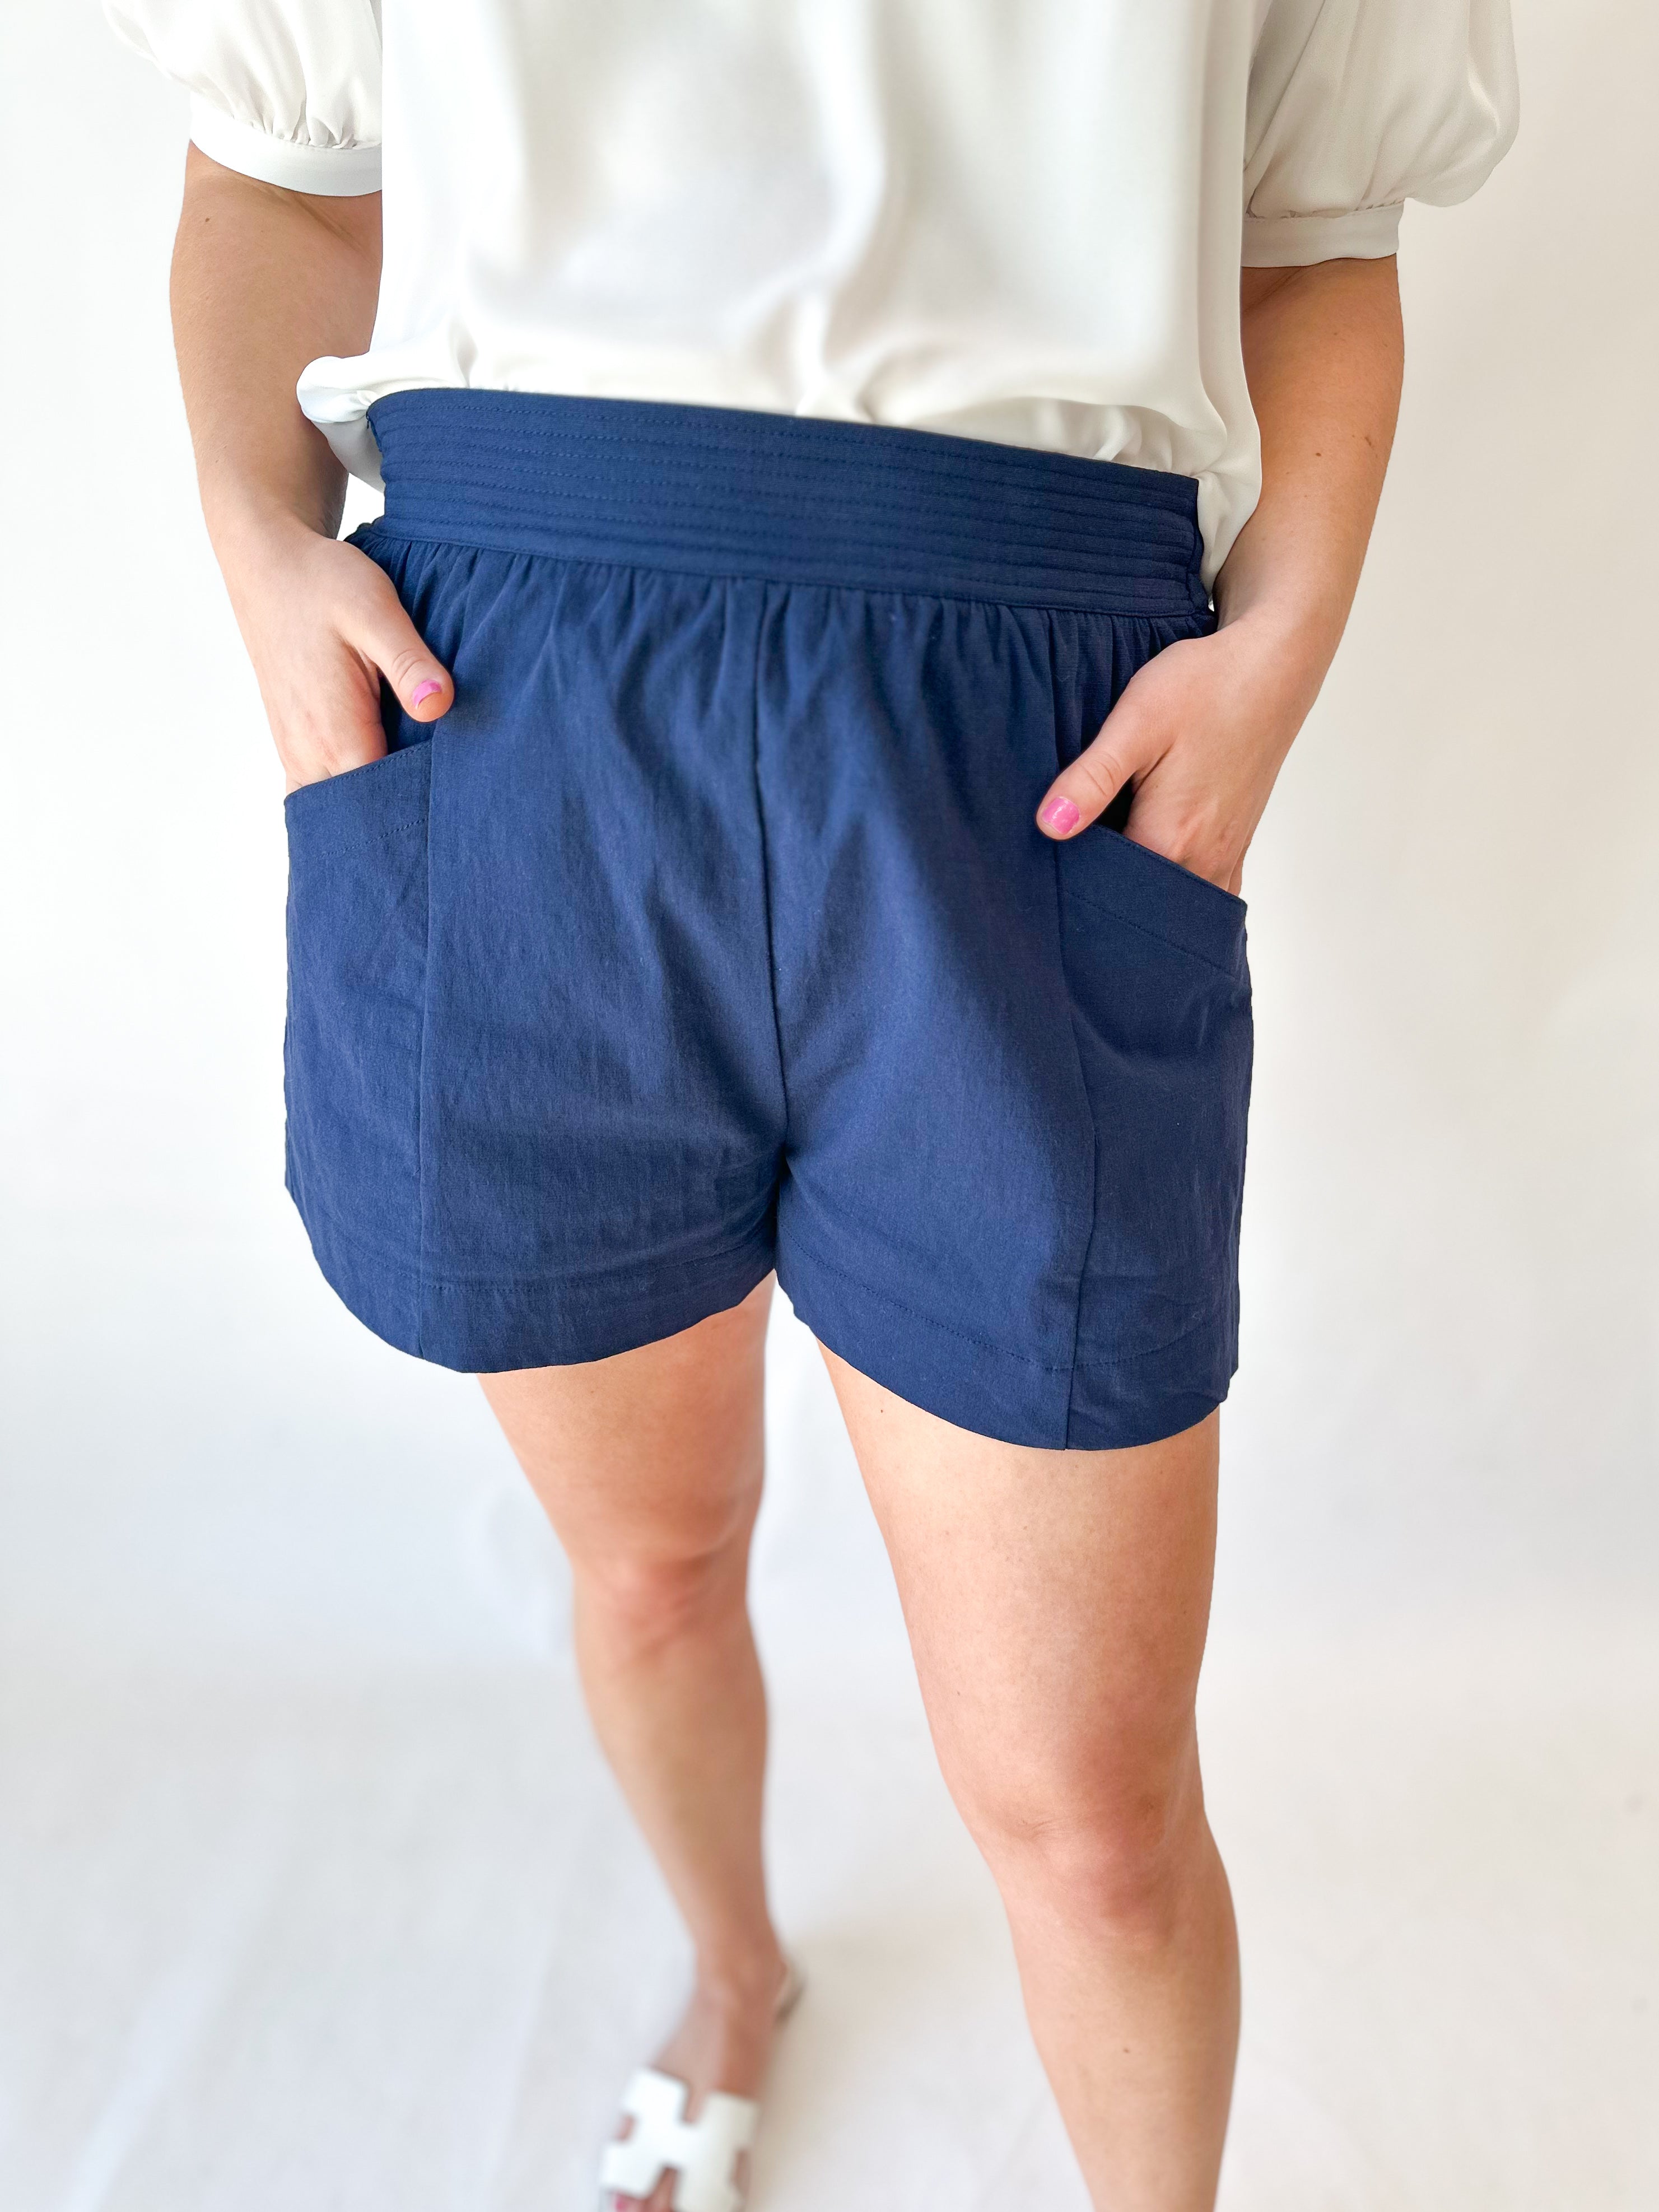 The Everyday Short - Navy-410 Shorts/Skirts-ENTRO-July & June Women's Fashion Boutique Located in San Antonio, Texas